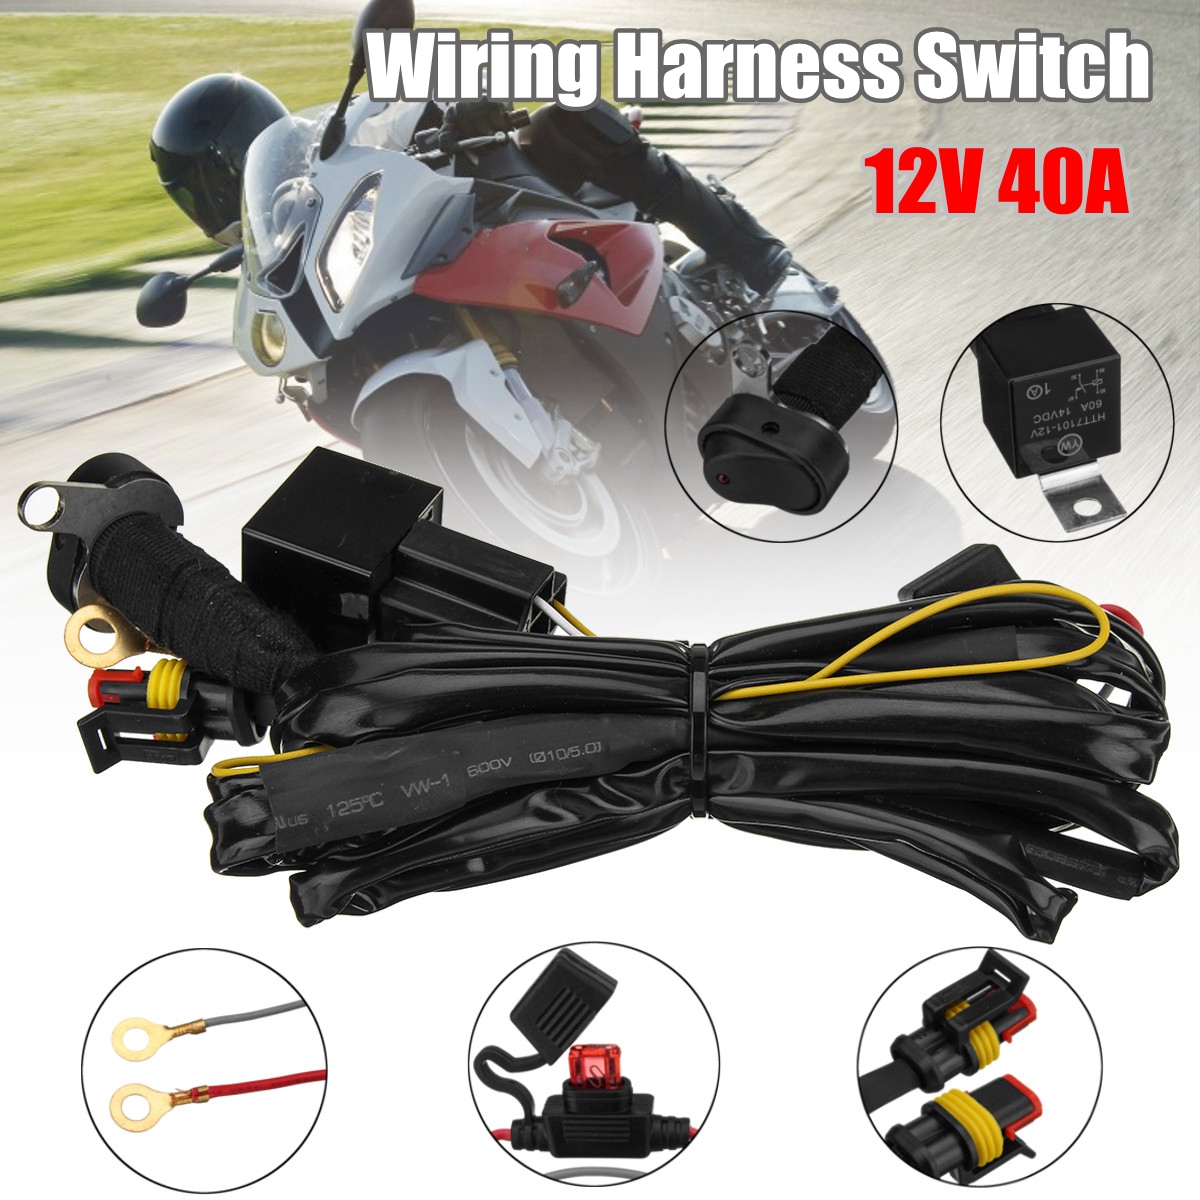 12v wiring harness switch For BMW R1200GS F800GS / ADV